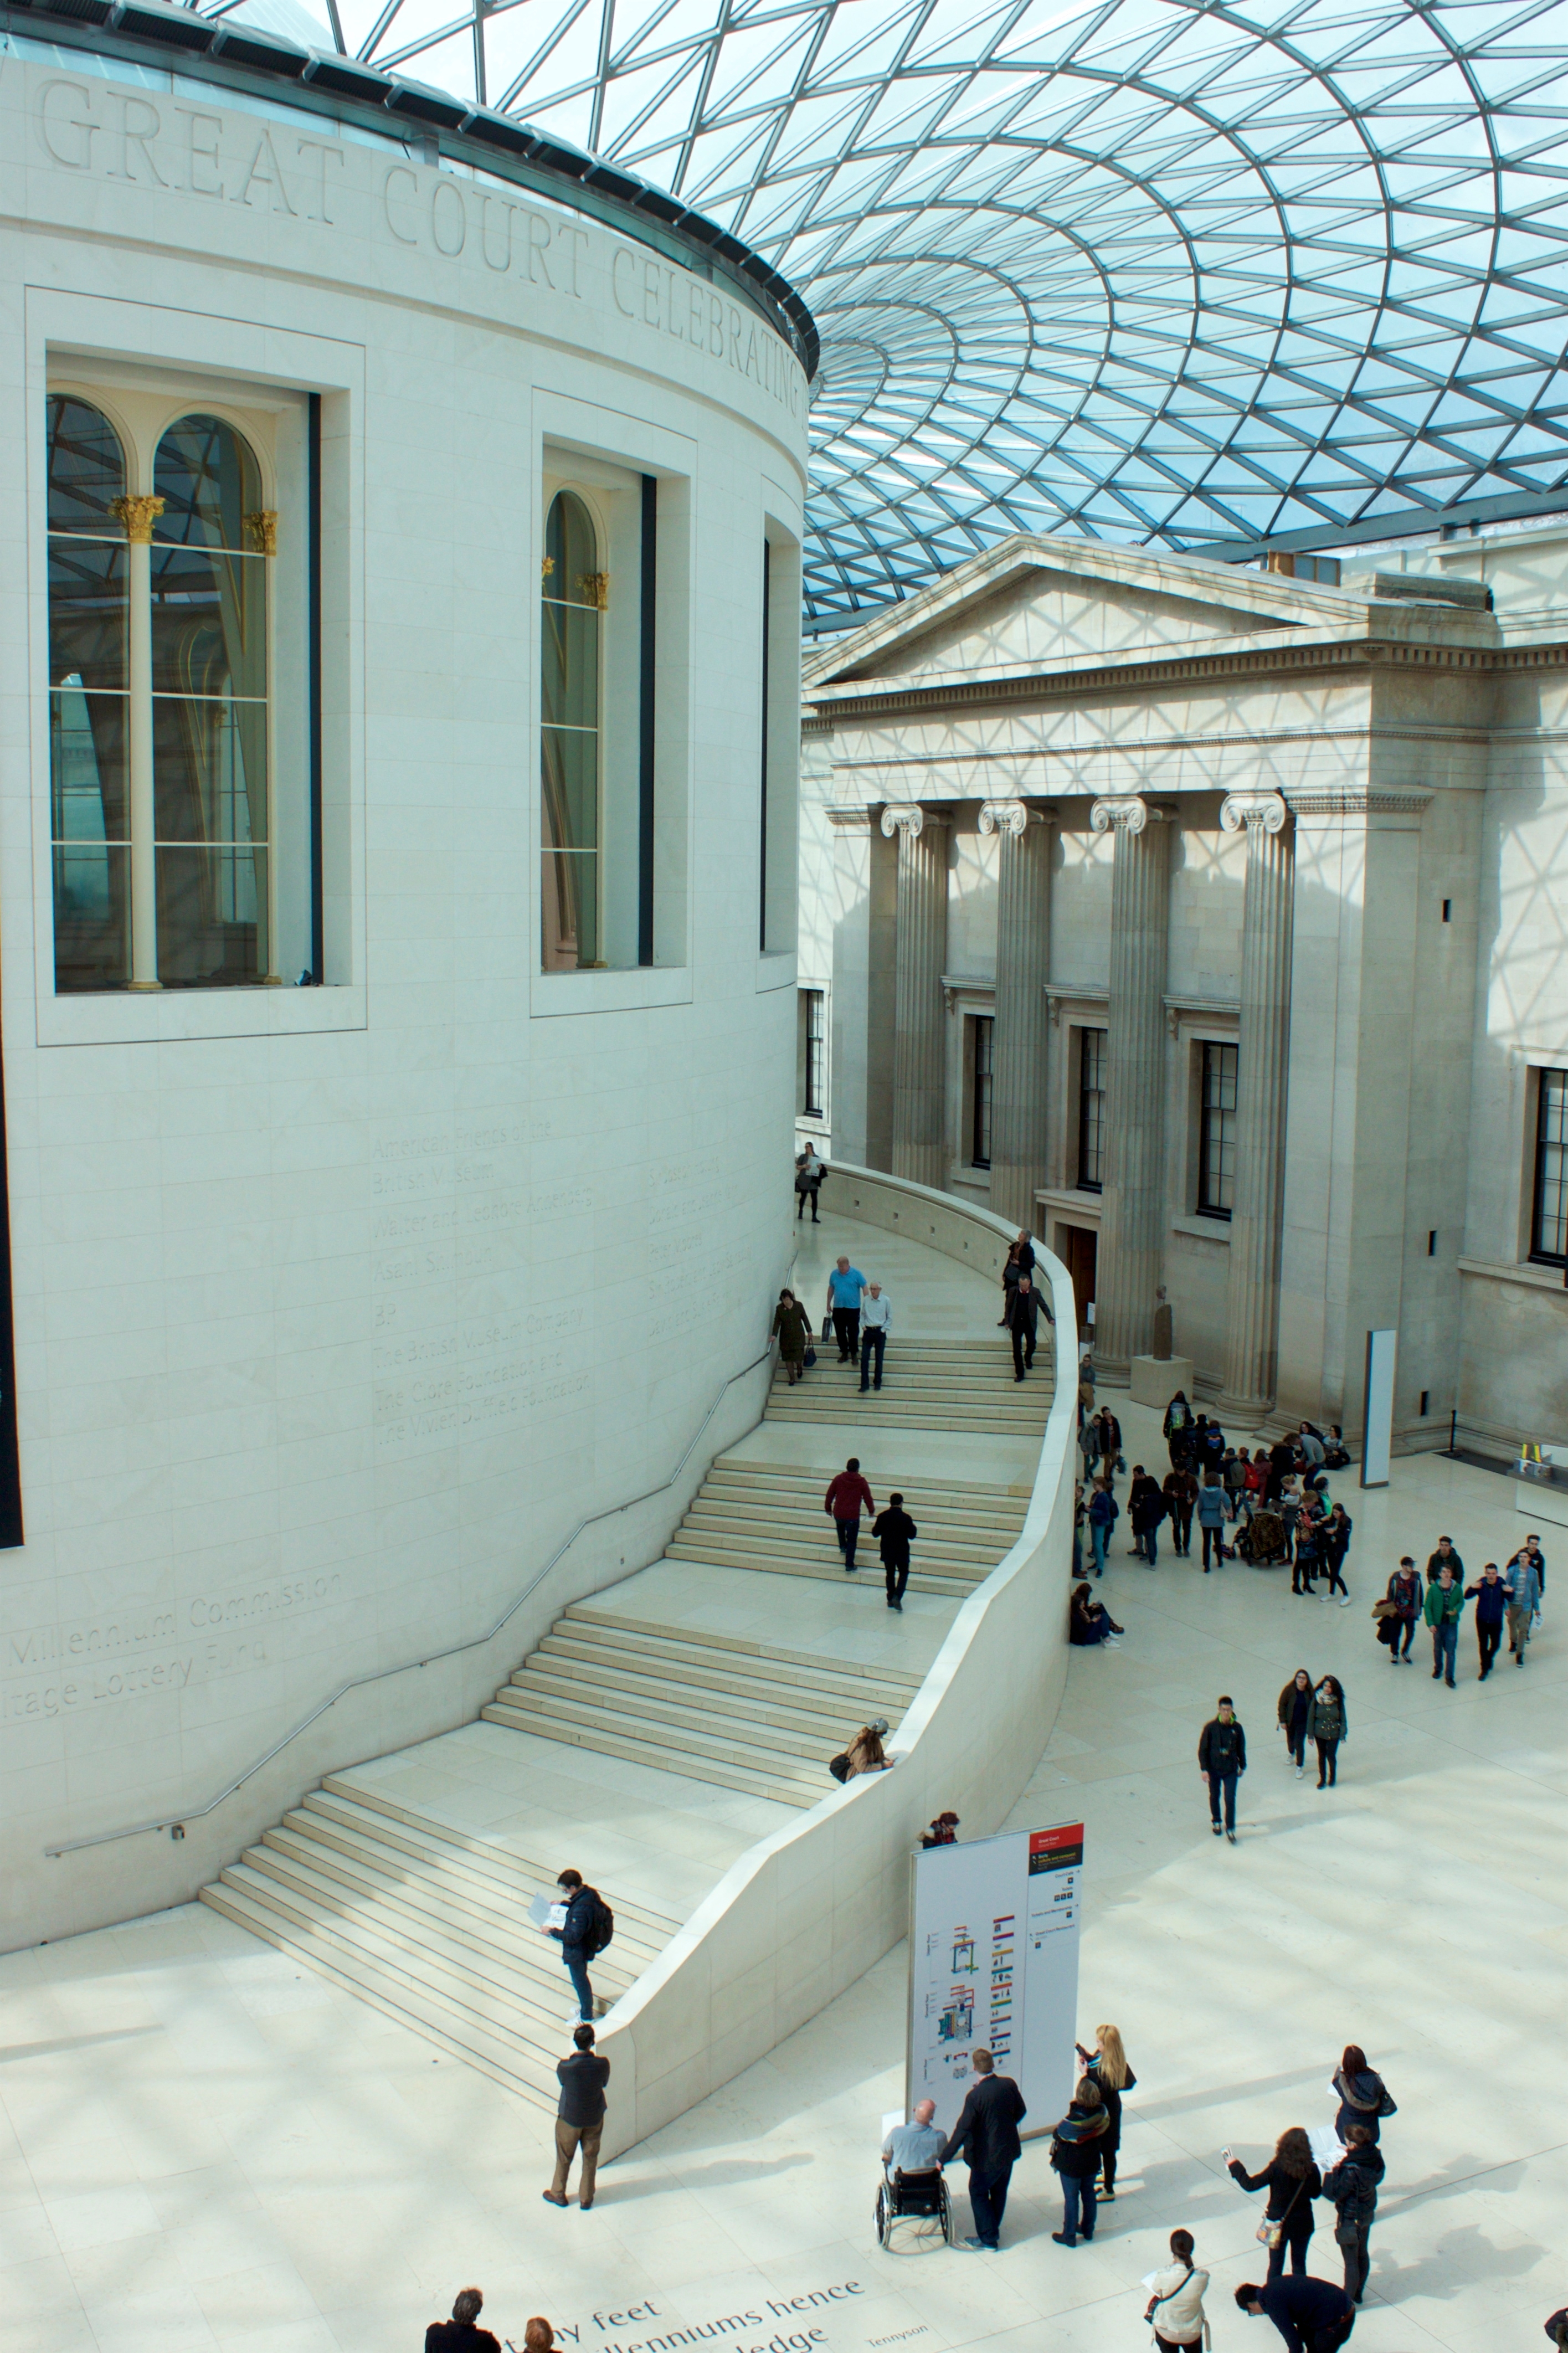 Looking down on Tourists in British museum in London